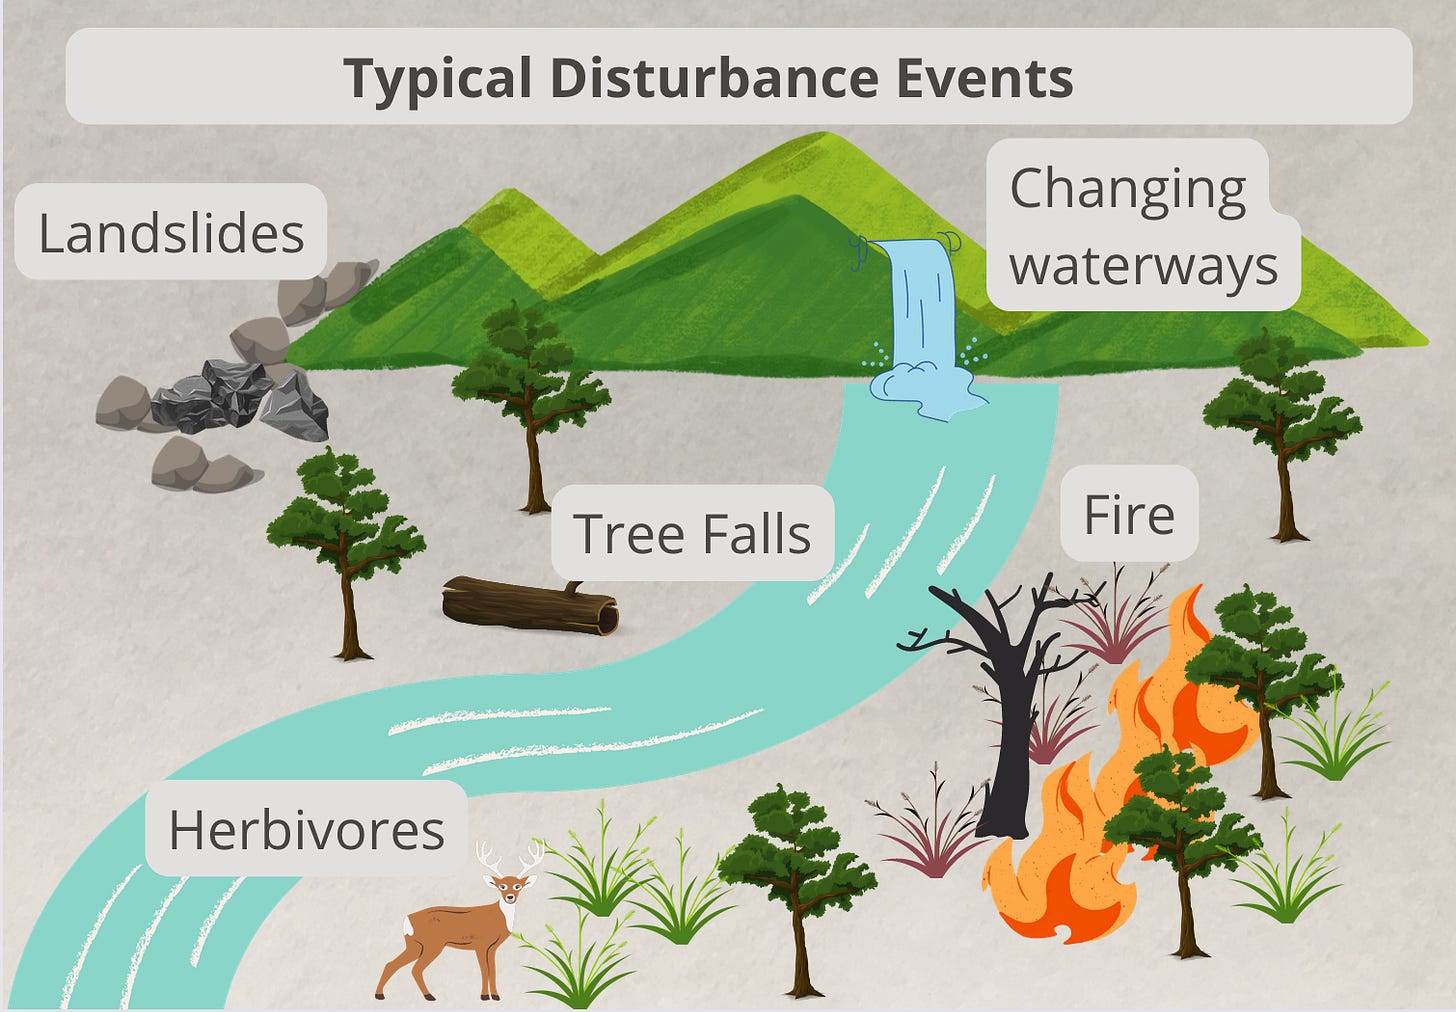 A landscape image titled "Typical disturbance events" showing a mountain with a waterfall that flows into a river passing through some woods. Different disturbance events are highlighted in the image. 

The waterfall is labeled "Changing Waterways", some rocks tumbling down the mountain are labeled "landslides", a dead tree in the woods is labeled "tree falls" a deer is labeled "herbivores" and a fire moving through the woods is labeled "fire"